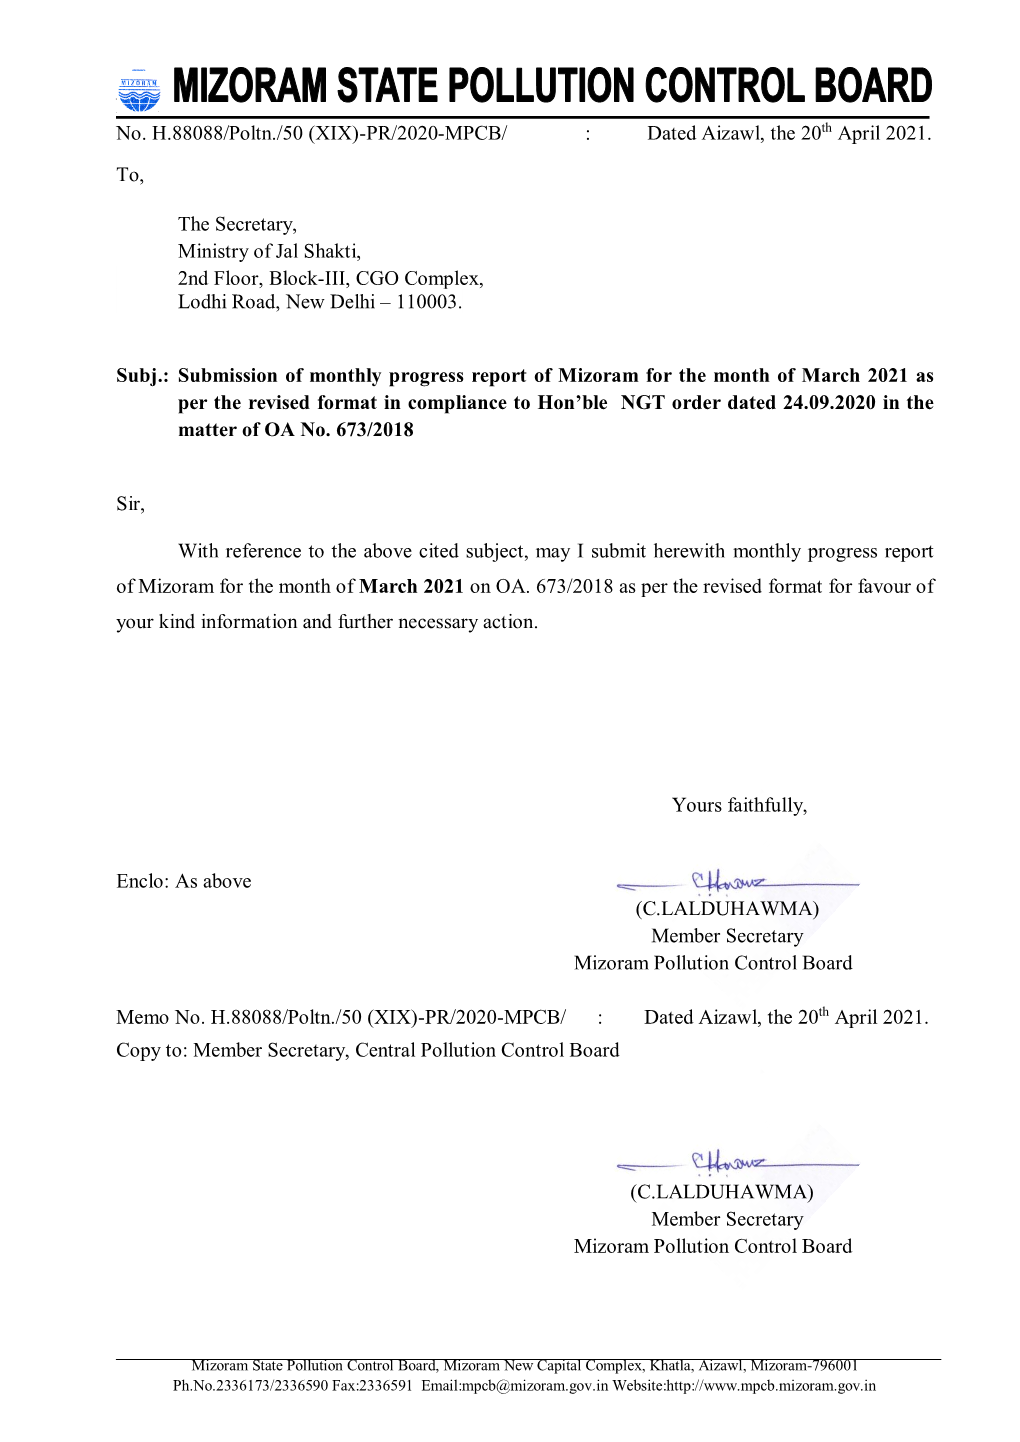 March 2021 As Per the Revised Format in Compliance to Hon’Ble NGT Order Dated 24.09.2020 in the Matter of OA No